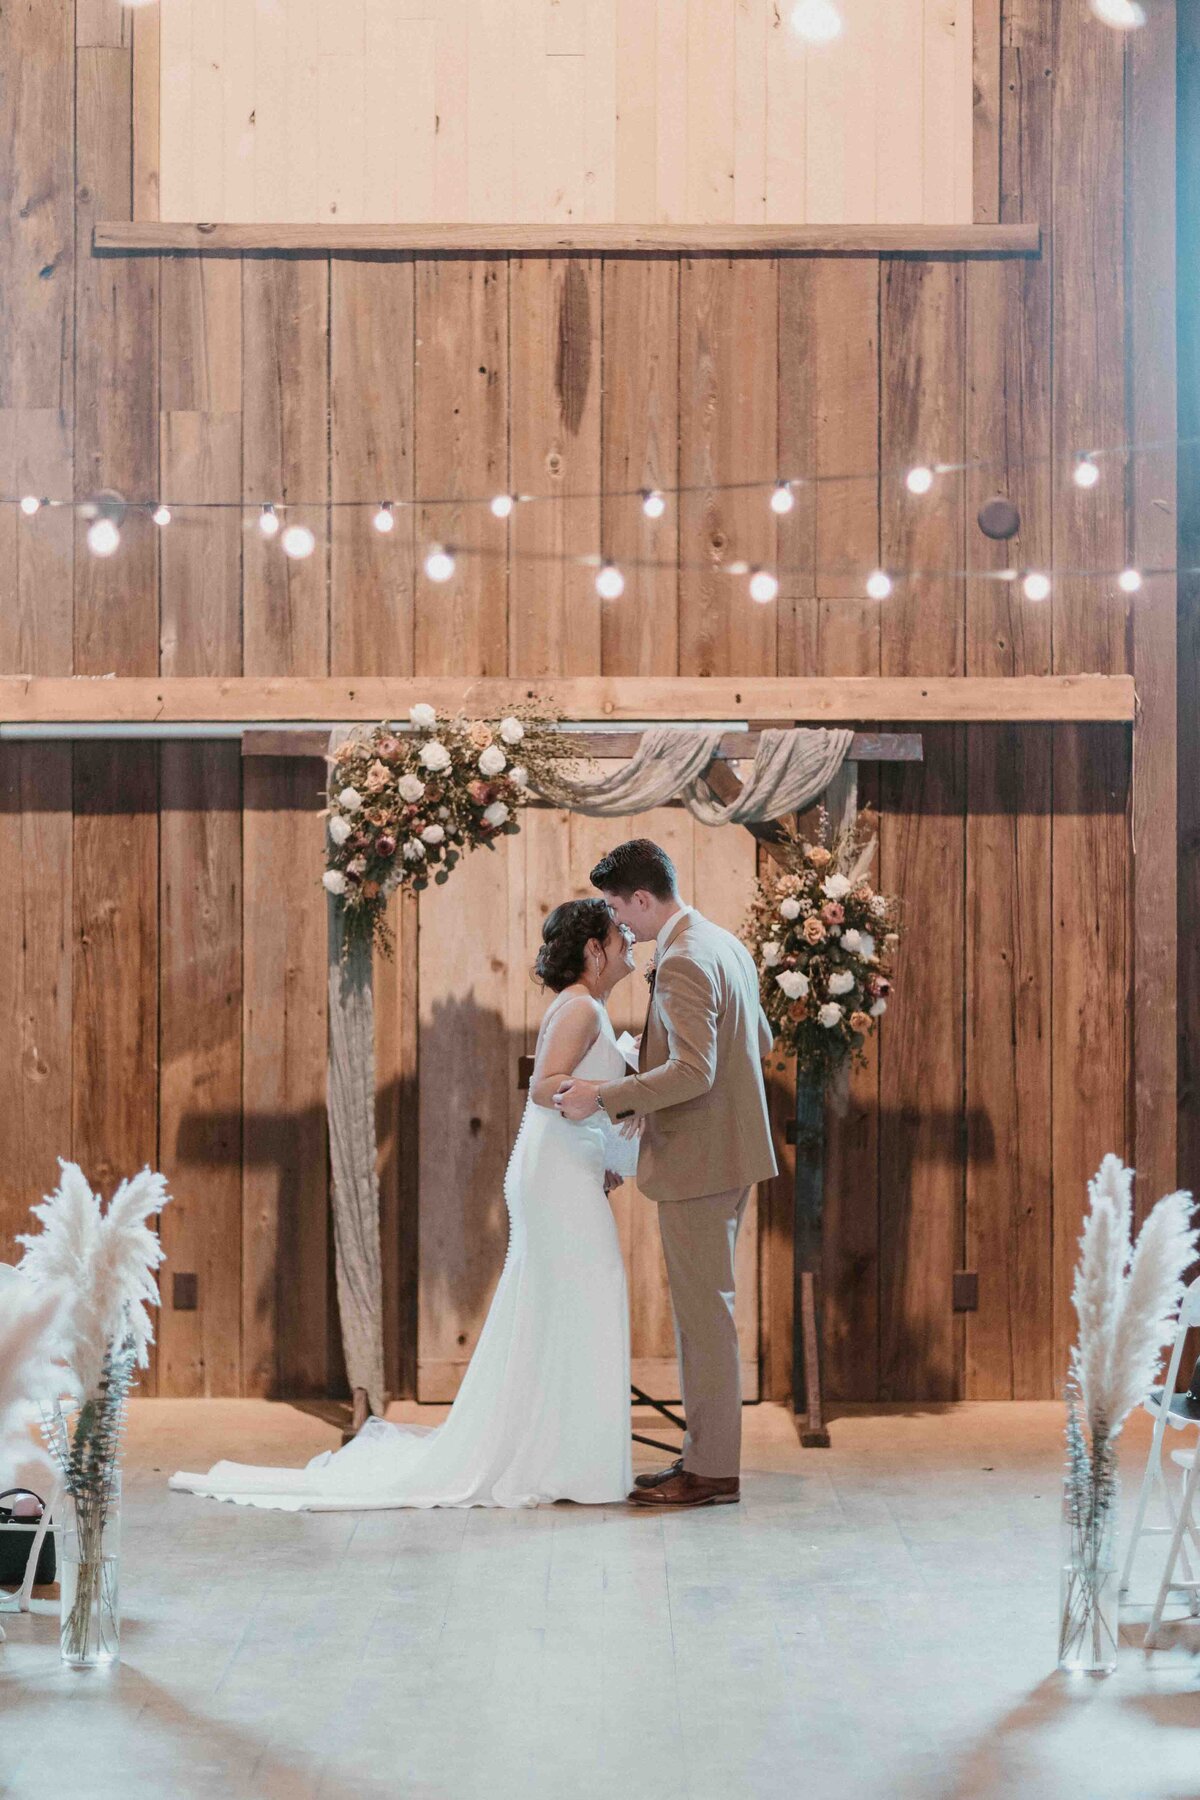 Bride and groom in a tan suit stand under their wooden arbor and market lights